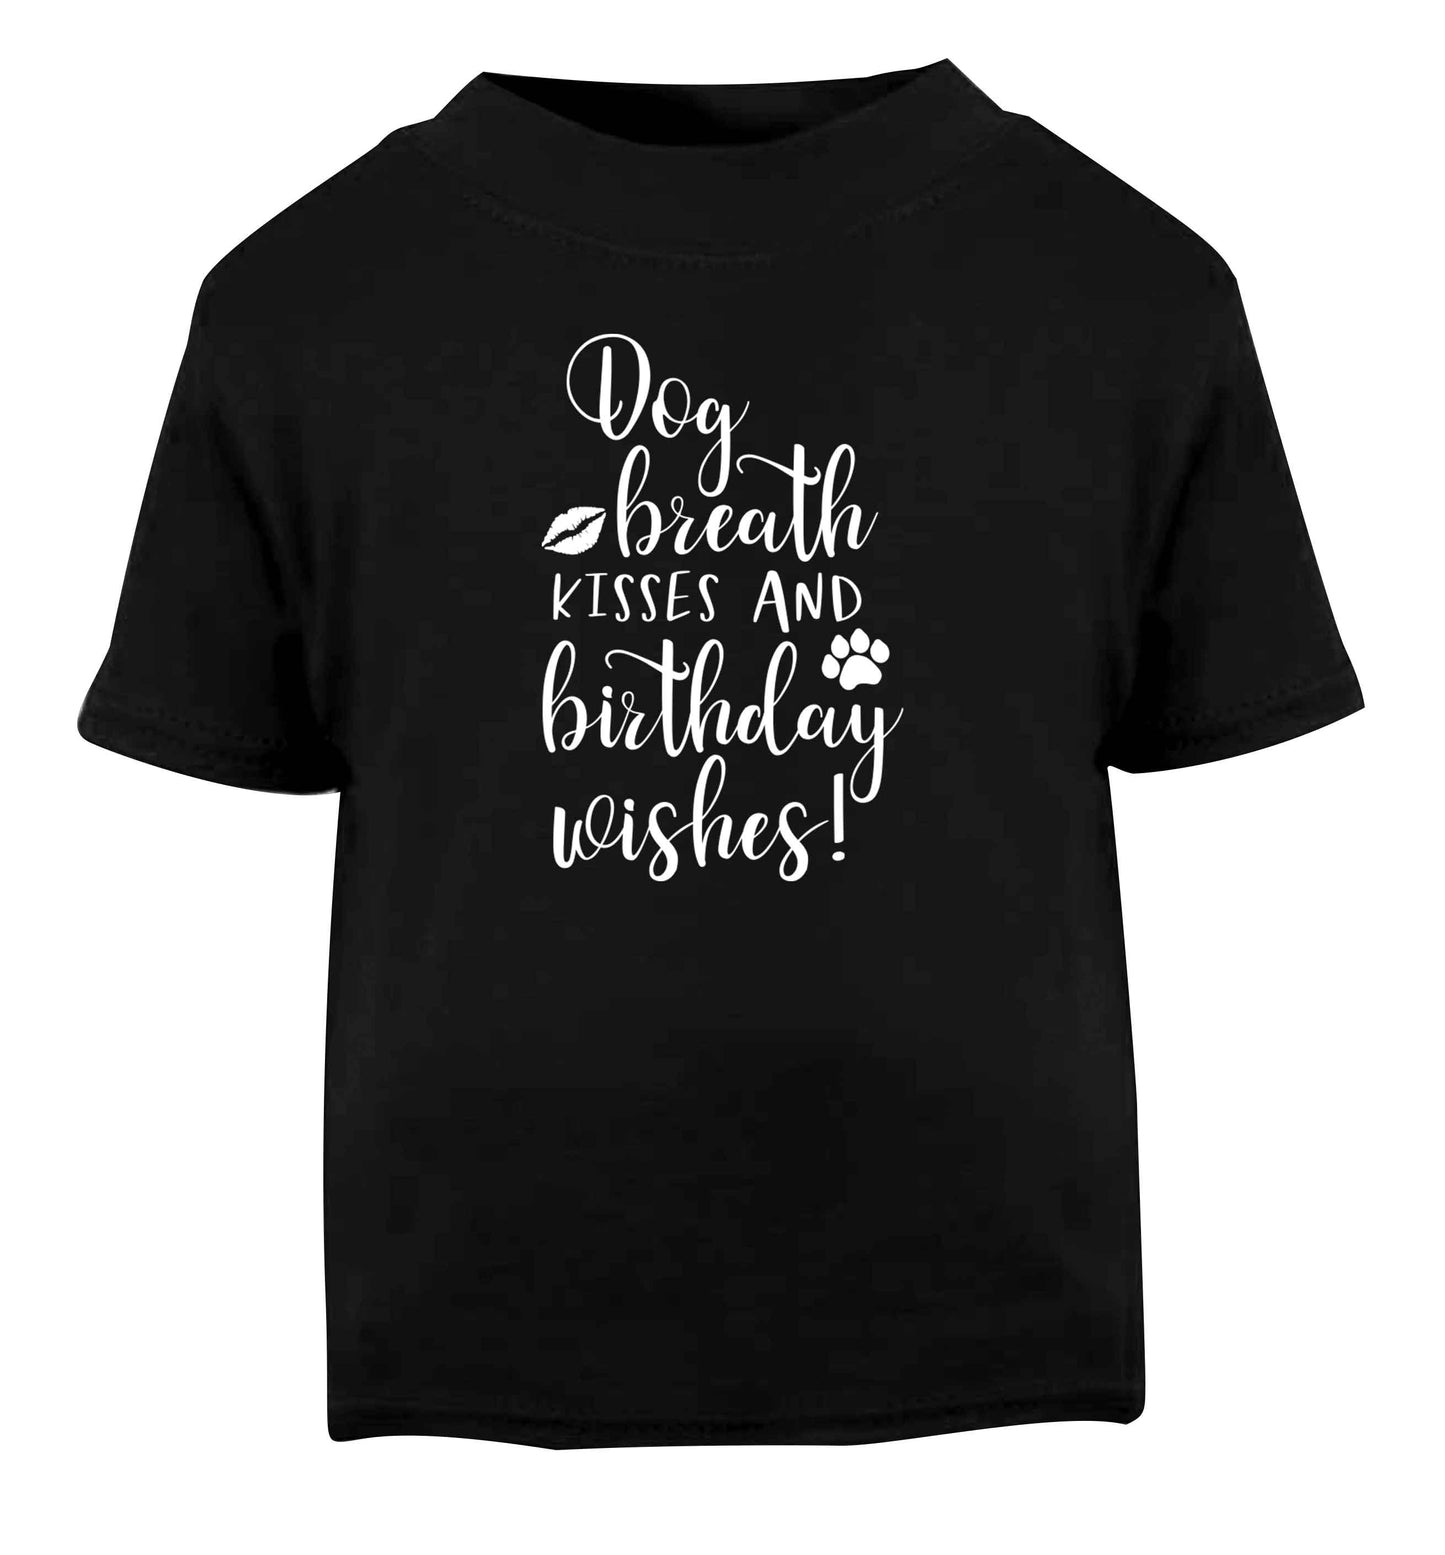 Dog breath kisses and christmas wishes Black Baby Toddler Tshirt 2 years